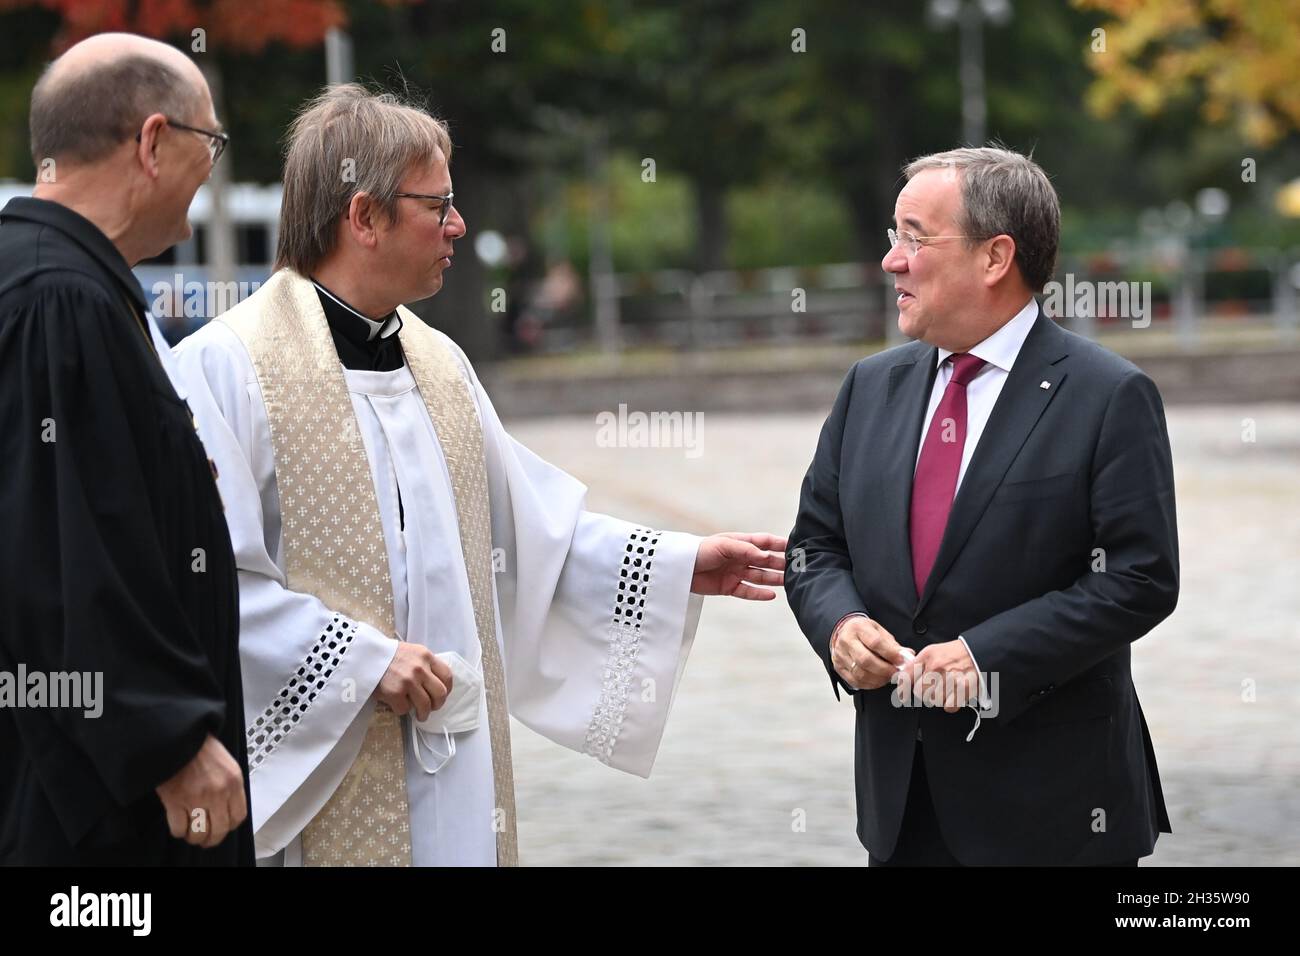 Berlin, Germany. 26th Oct, 2021. The Plenipotentiary of the Council of the Evangelical Church in Germany (EKD), Martin Dutzmann (l), and the Head of the Catholic Office in Berlin, Prelate Karl Jüsten (m), receive the CDU Federal Chairman Armin Laschet (r) for the ecumenical service in the St. Mary's Church in Berlin before the constituent session of the new Bundestag. Credit: Britta Pedersen/dpa/Alamy Live News Stock Photo